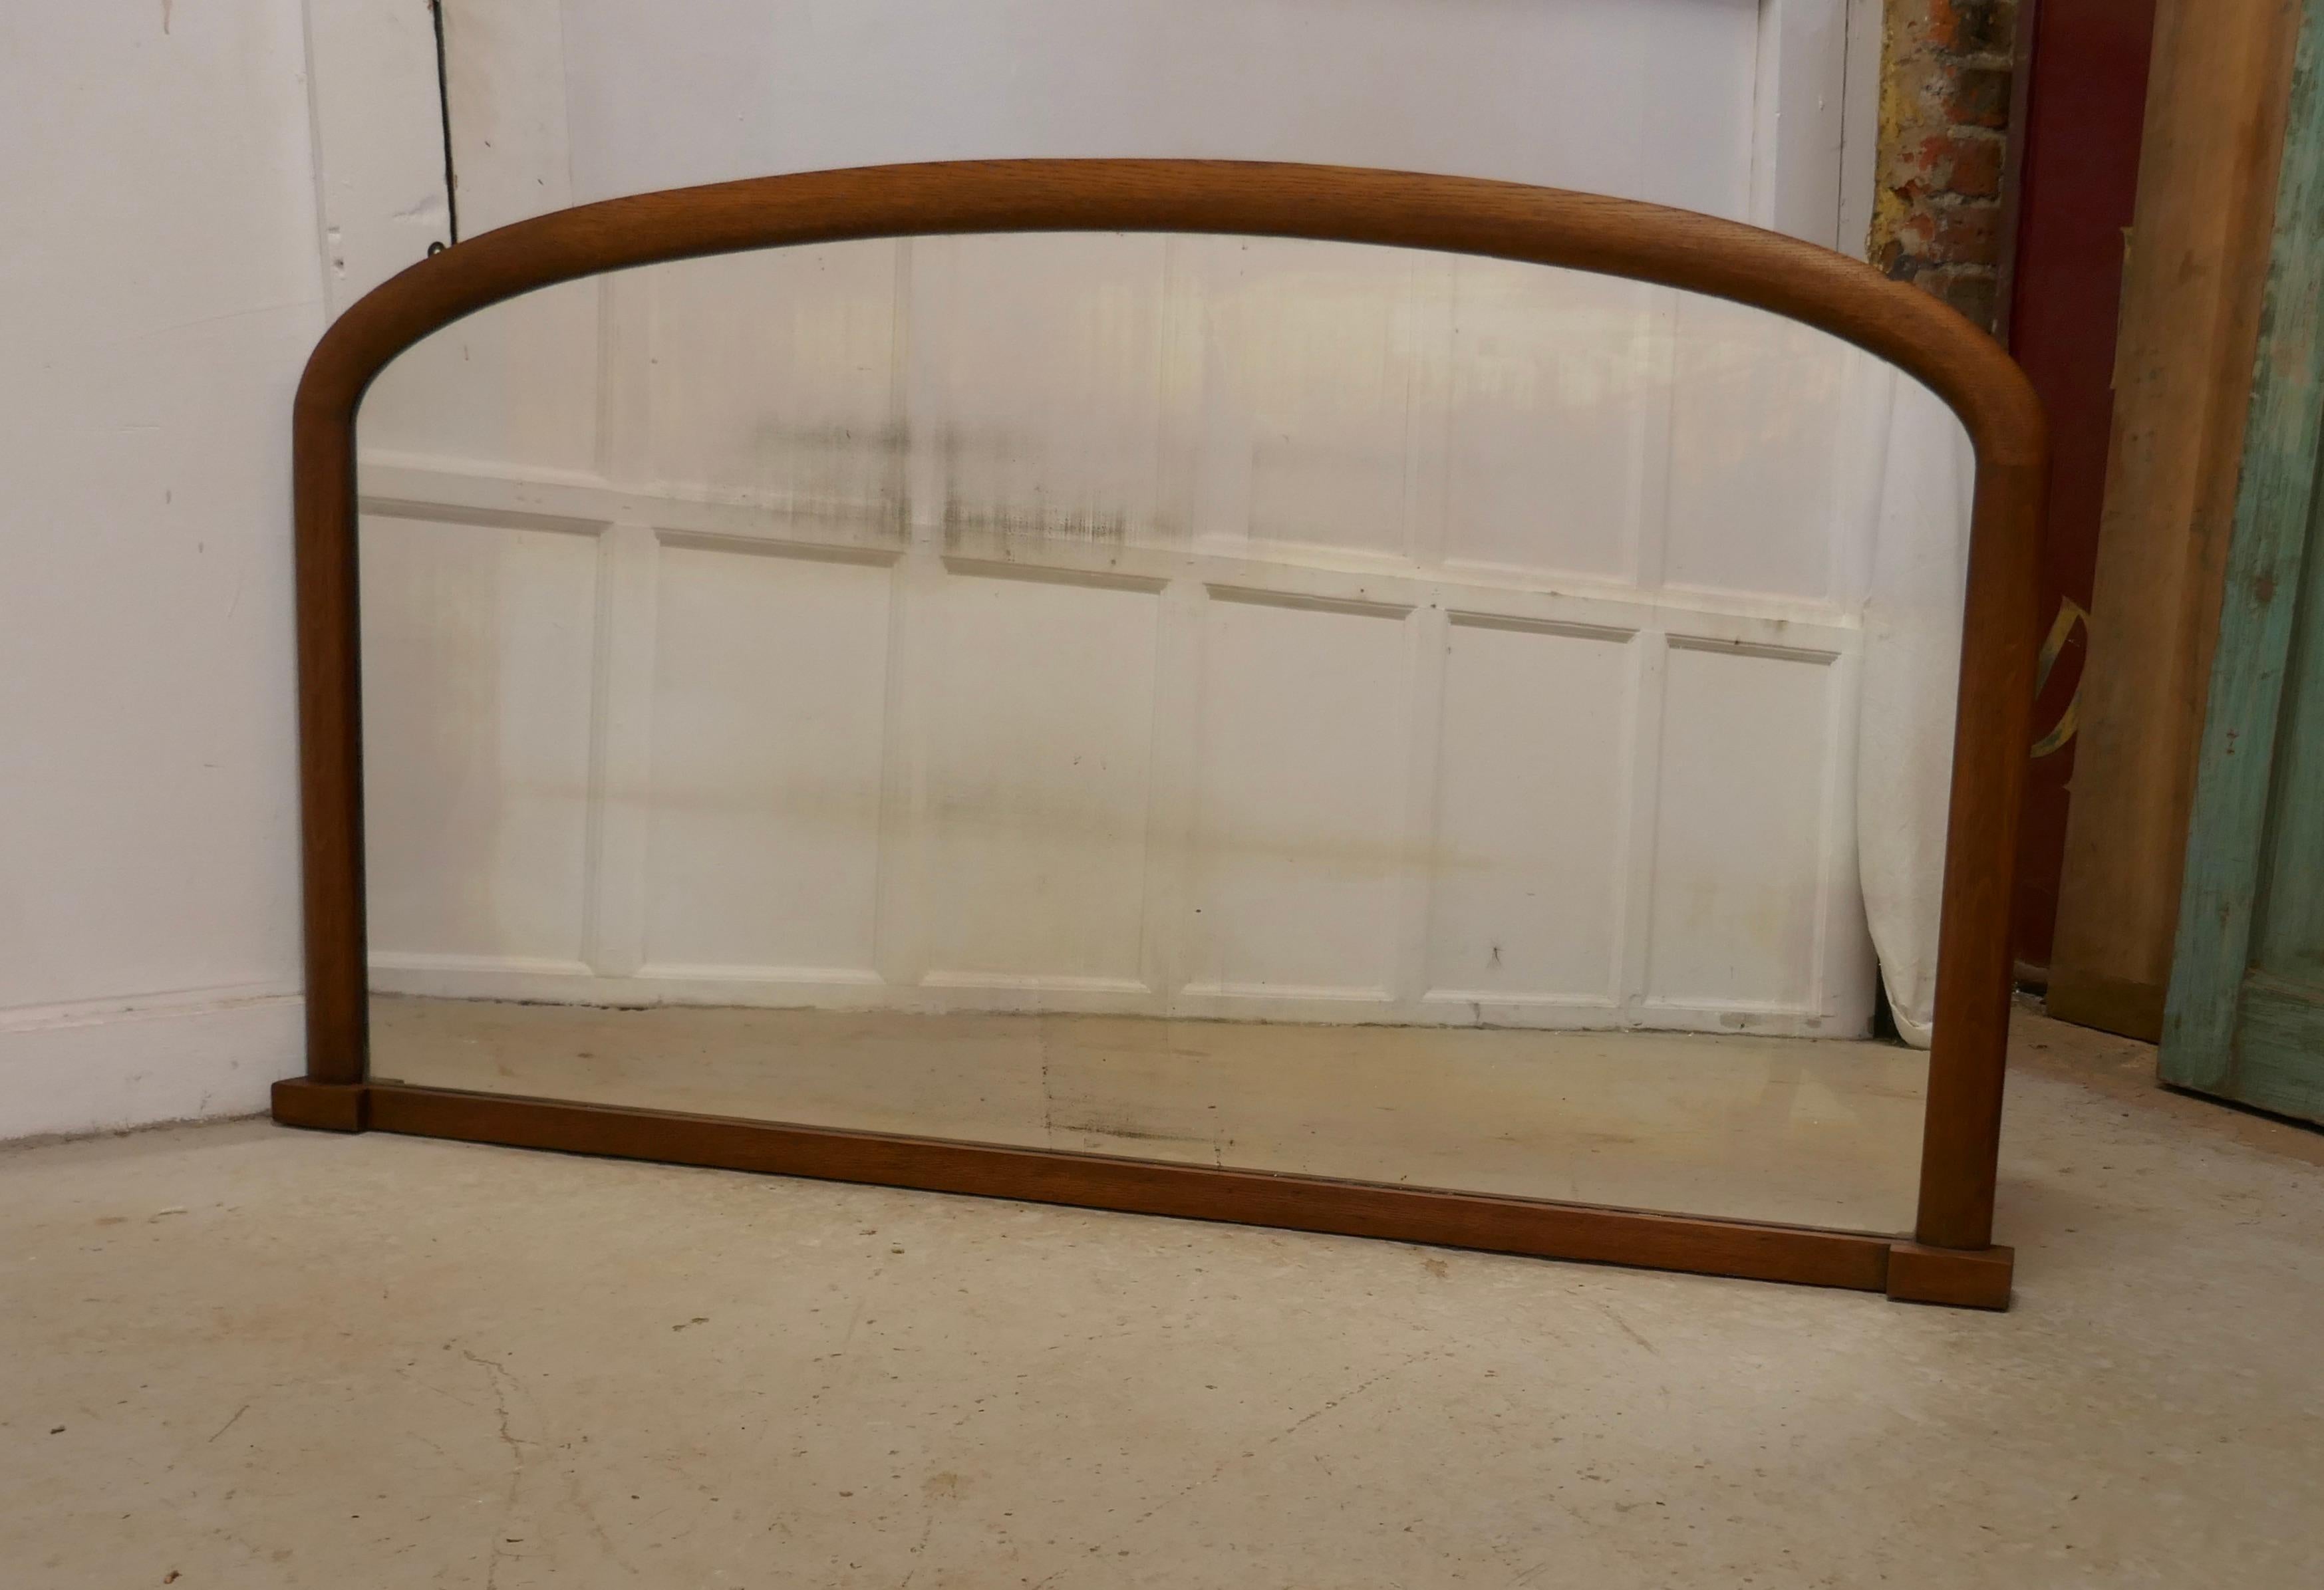 Victorian arched oak over mantle mirror

A lovely Victorian oak over mantle mirror

This is a charming piece, the arched frame is slightly curved with small feet at the base
The mirror is in good condition, the mercury looking glass is entirely